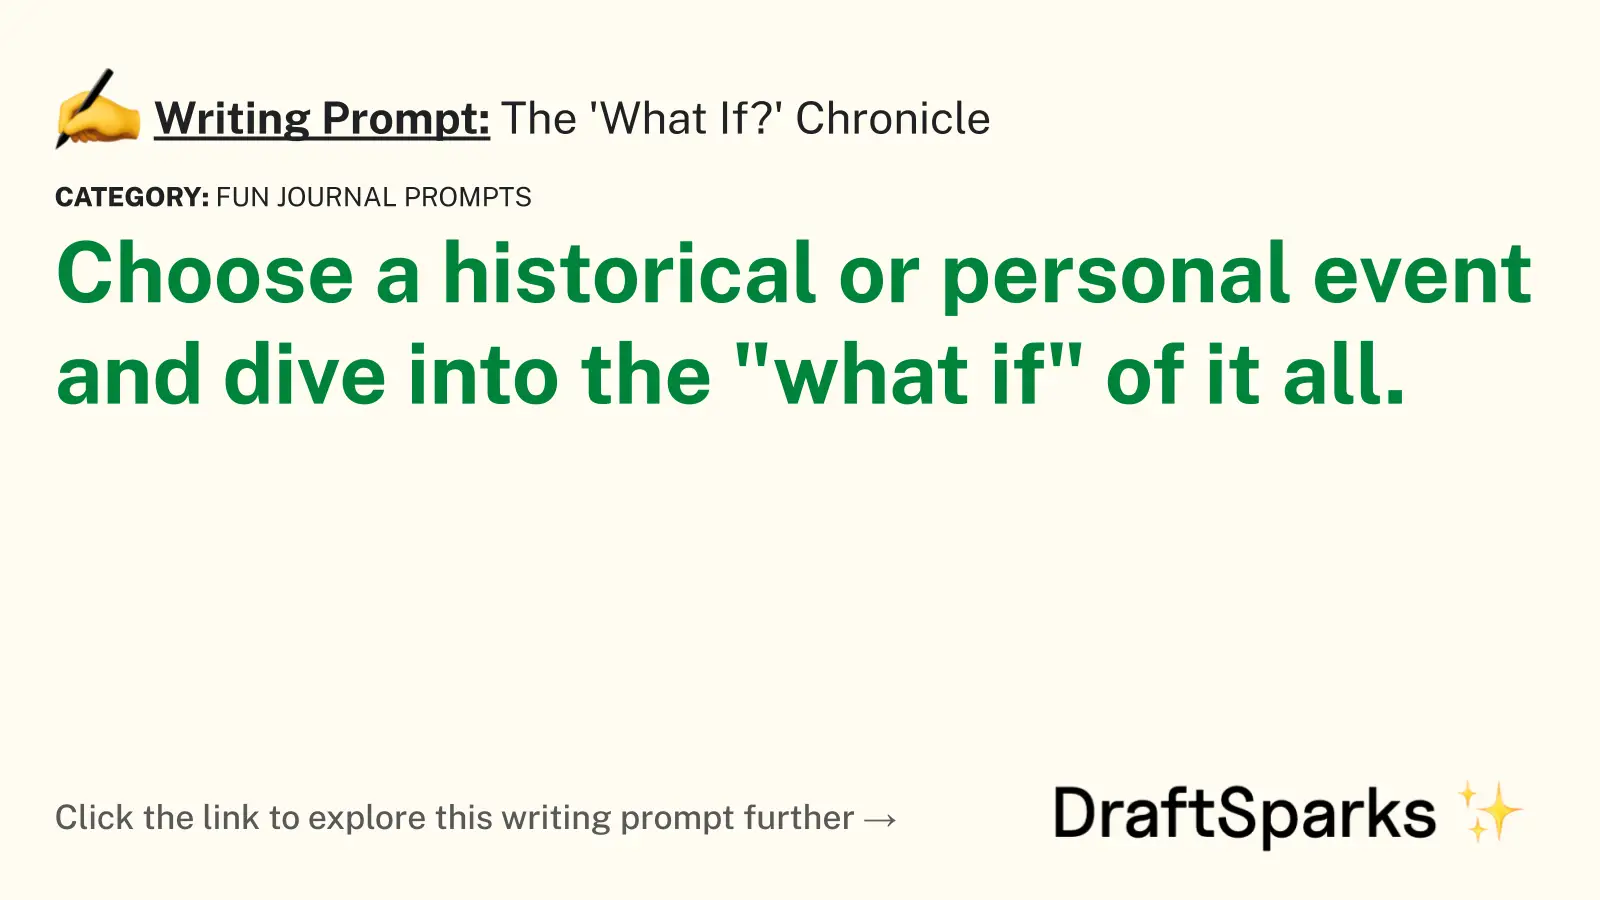 The ‘What If?’ Chronicle